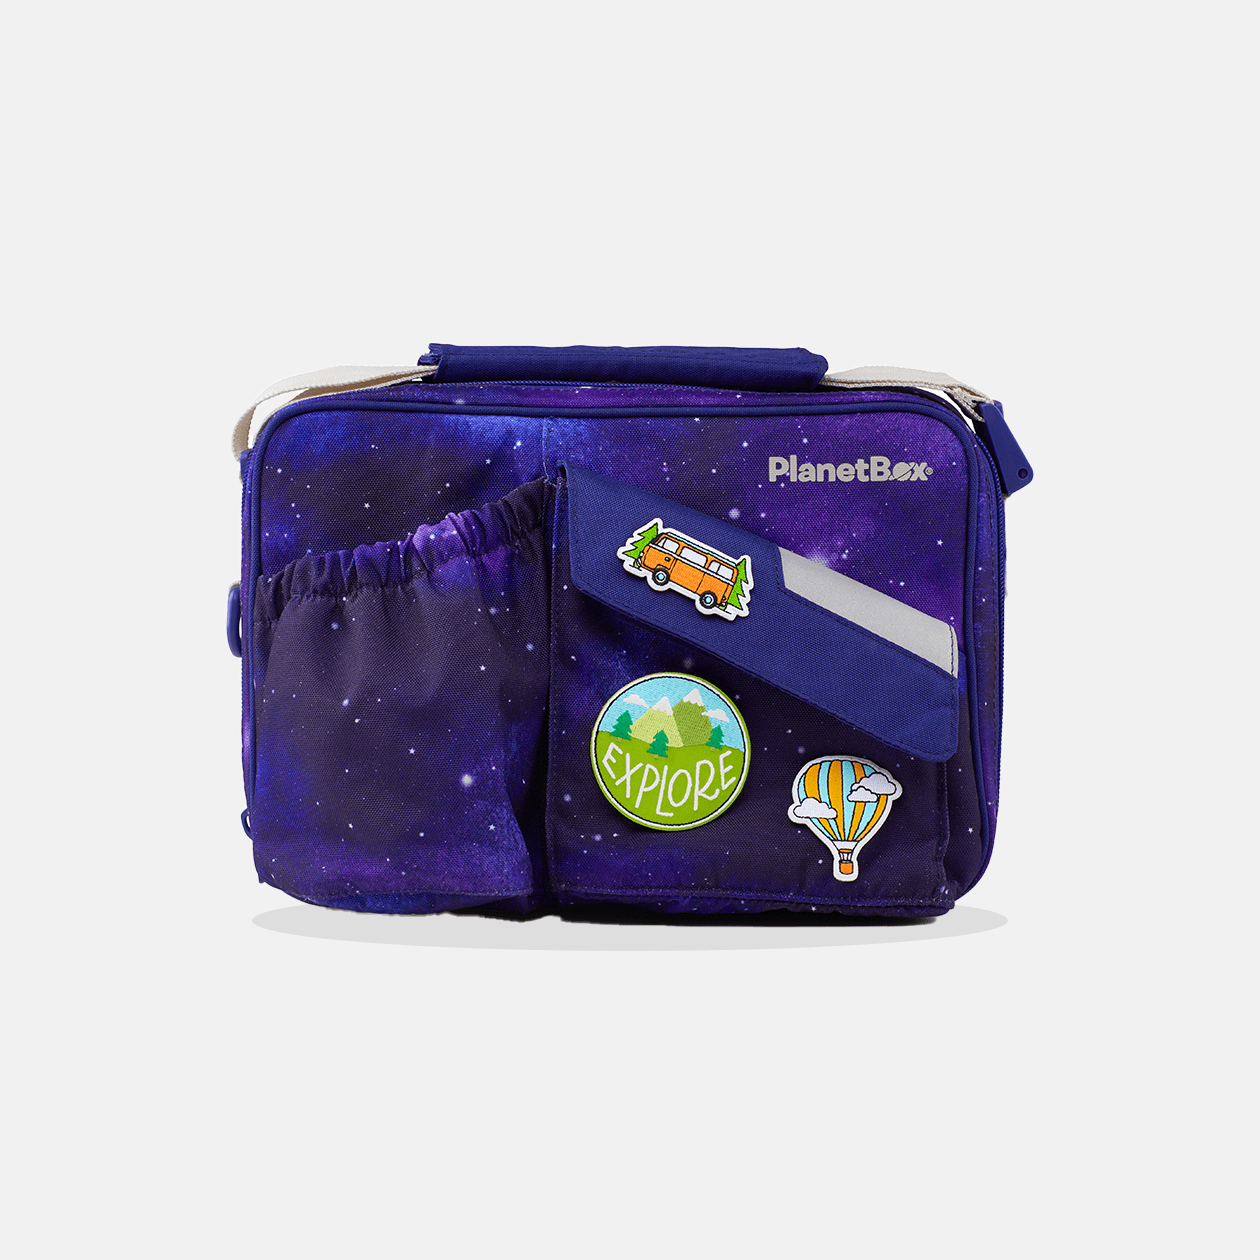 Stick-On Patches – PlanetBox